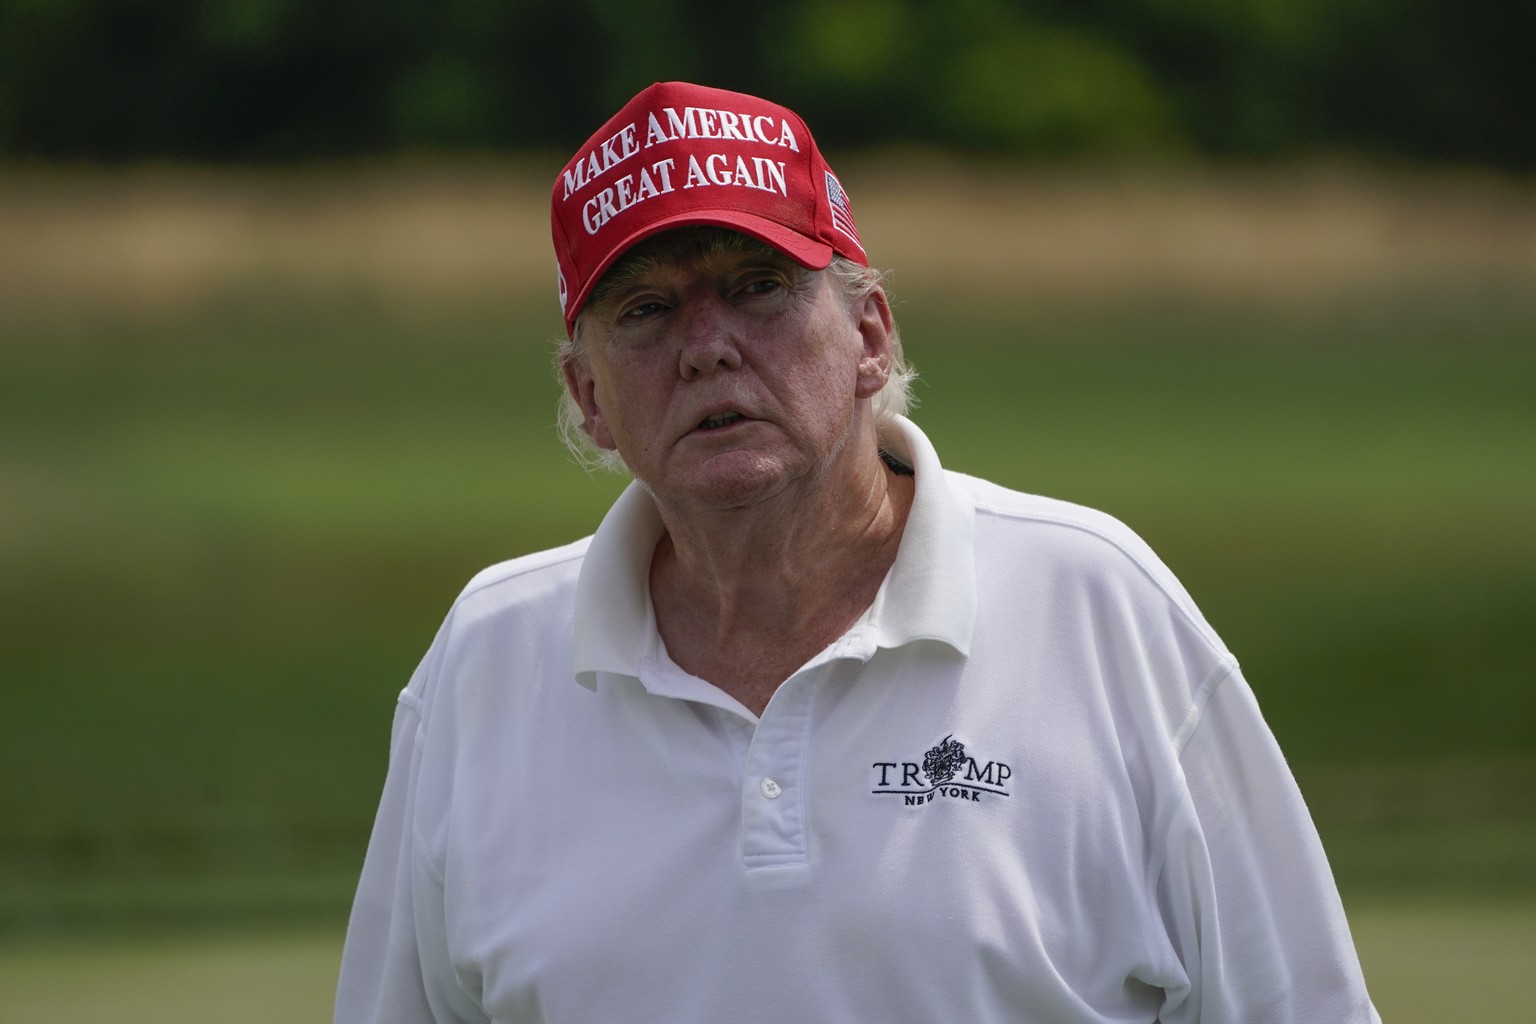 Former President Donald Trump plays during the pro-am round of the Bedminster Invitational LIV Golf tournament in Bedminster, NJ., Thursday, July 28, 2022. (AP Photo/Seth Wenig)
Donald Trump